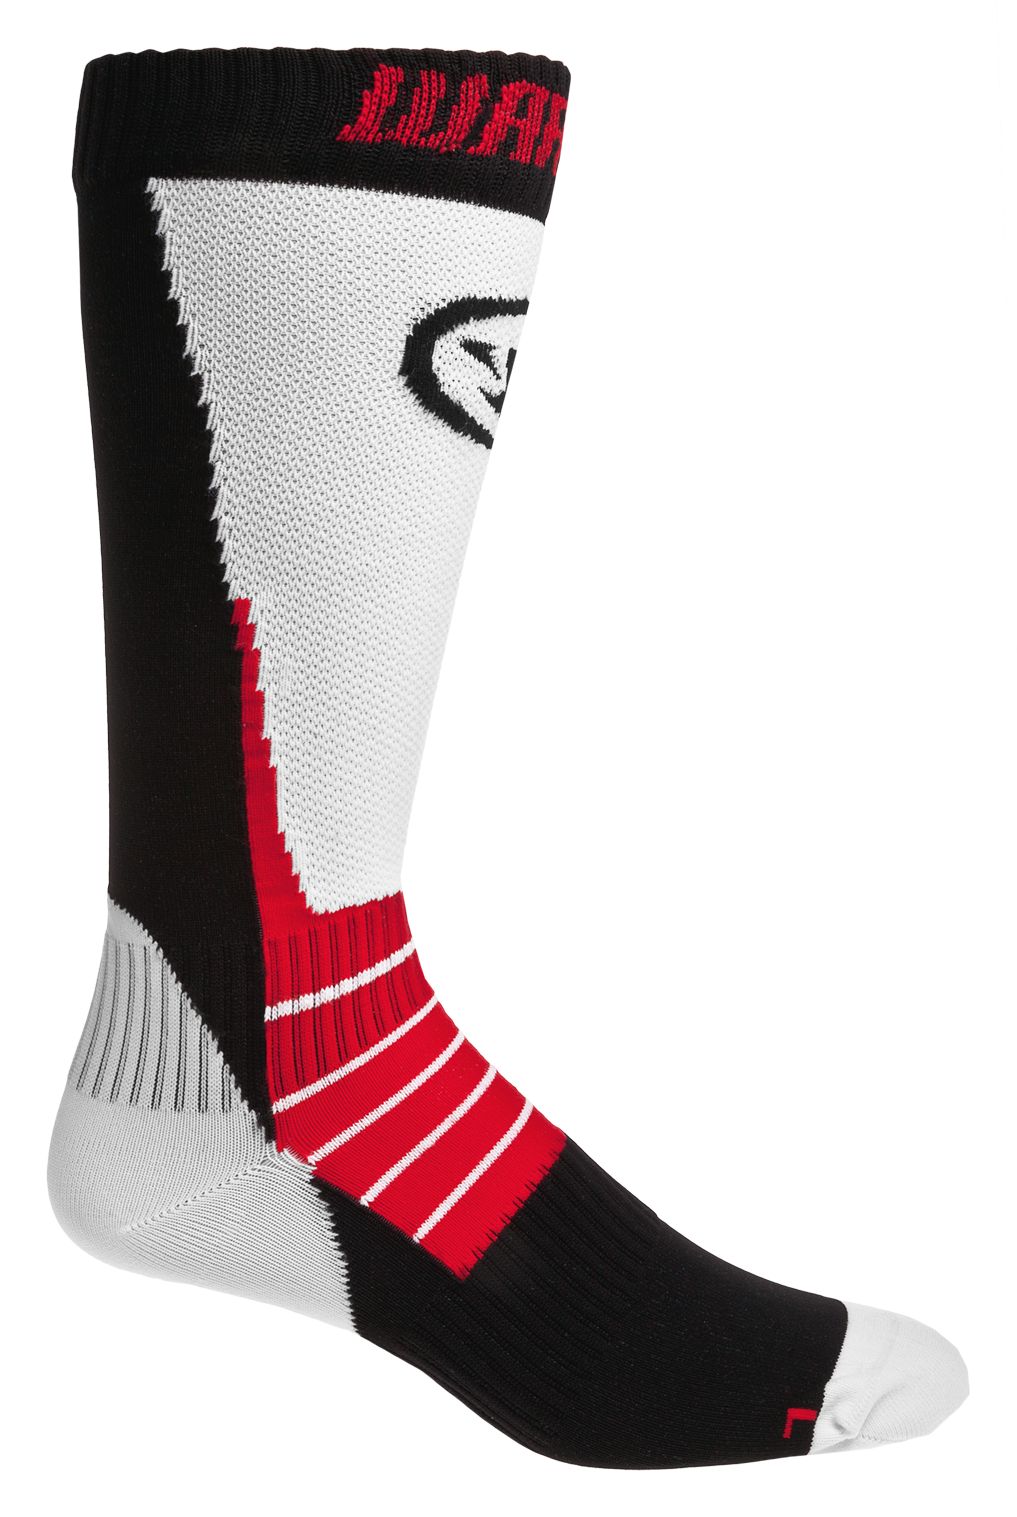 Dynasty AX2 Hockey Socks, White with Black & Red image number 1